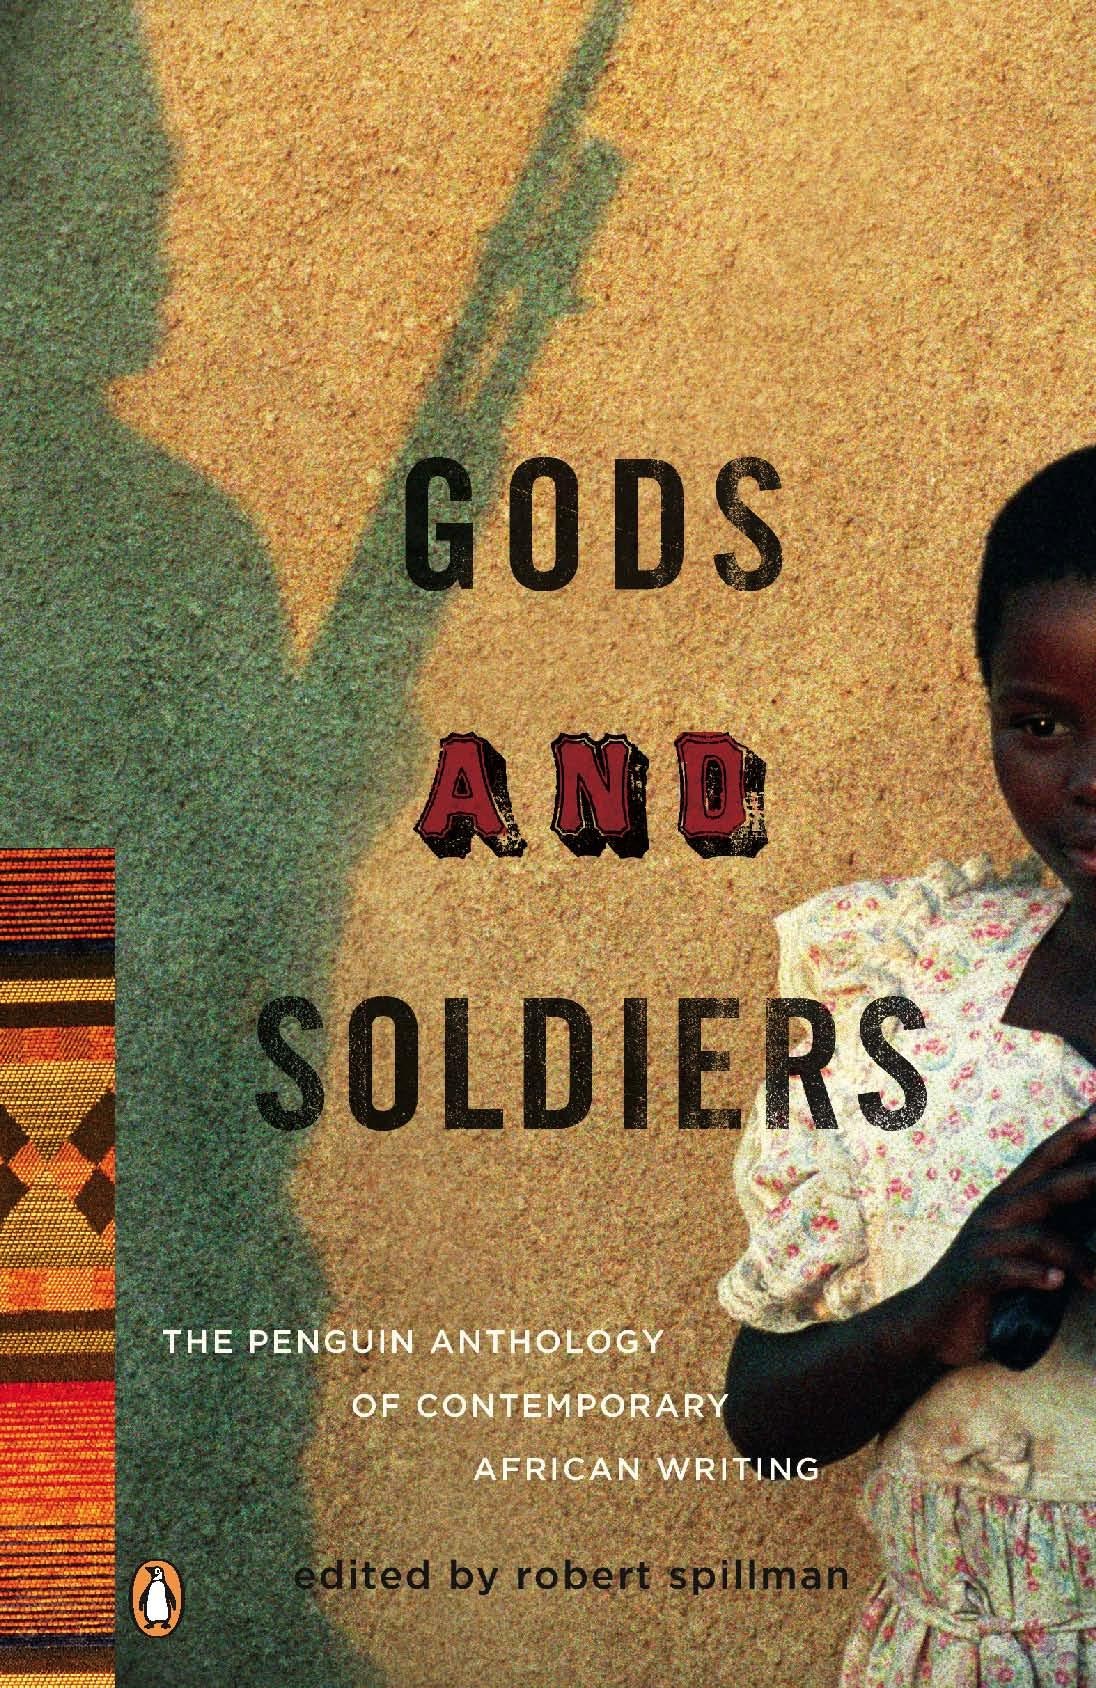 http://betsylerner.files.wordpress.com/2009/05/gods-and-soldiers-cover.jpg